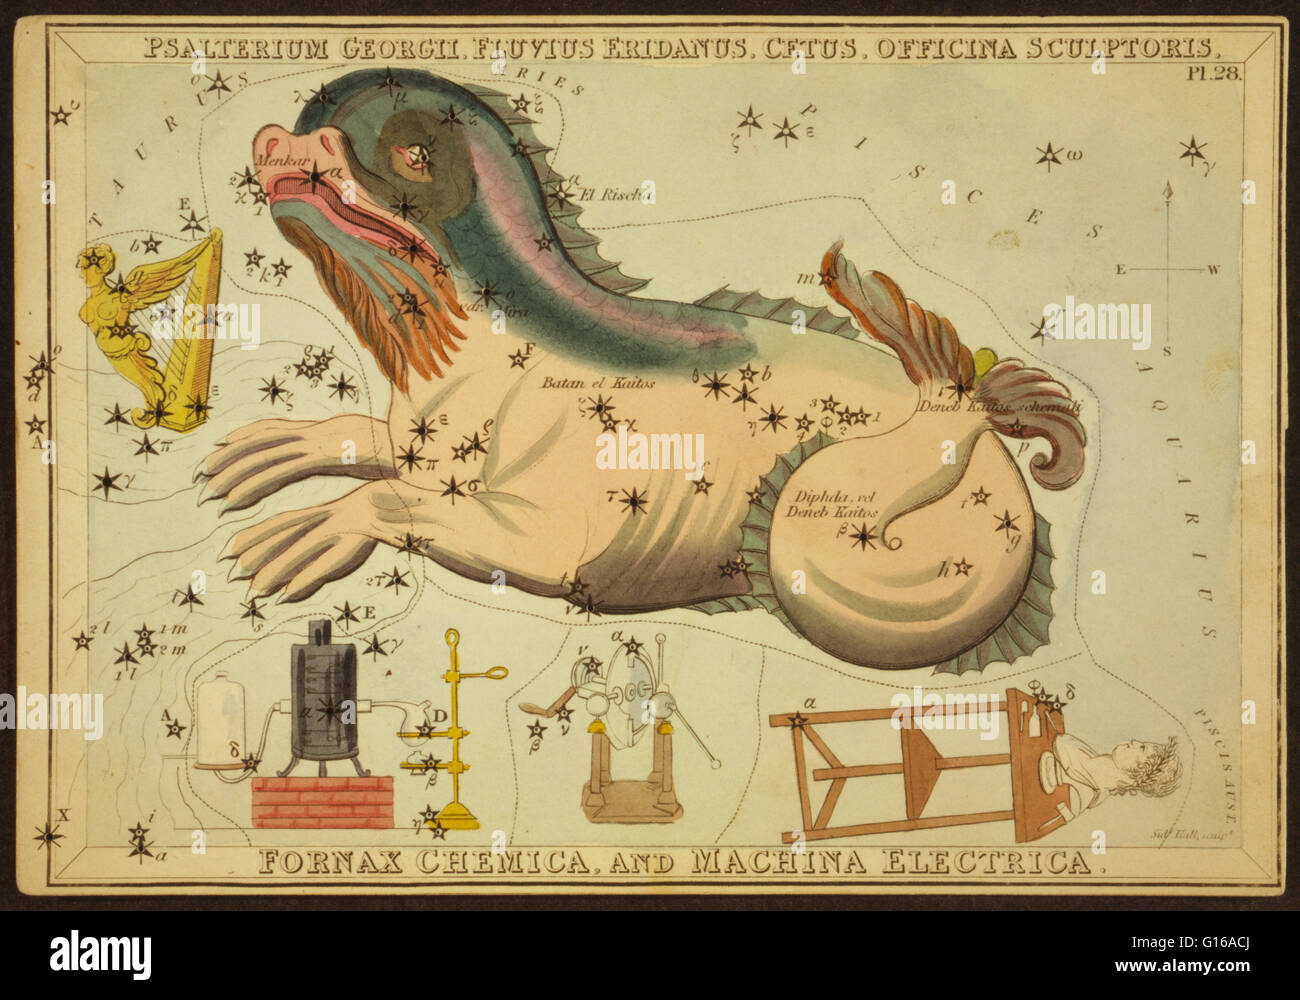 Astronomical chart showing a whale, a harp, chemical apparatus, a mechanical device, and a table on which is a bust and sculpting tools forming the constellations. Cetus constellation's name refers to Cetus, a sea monster in Greek mythology. Cetus may hav Stock Photo